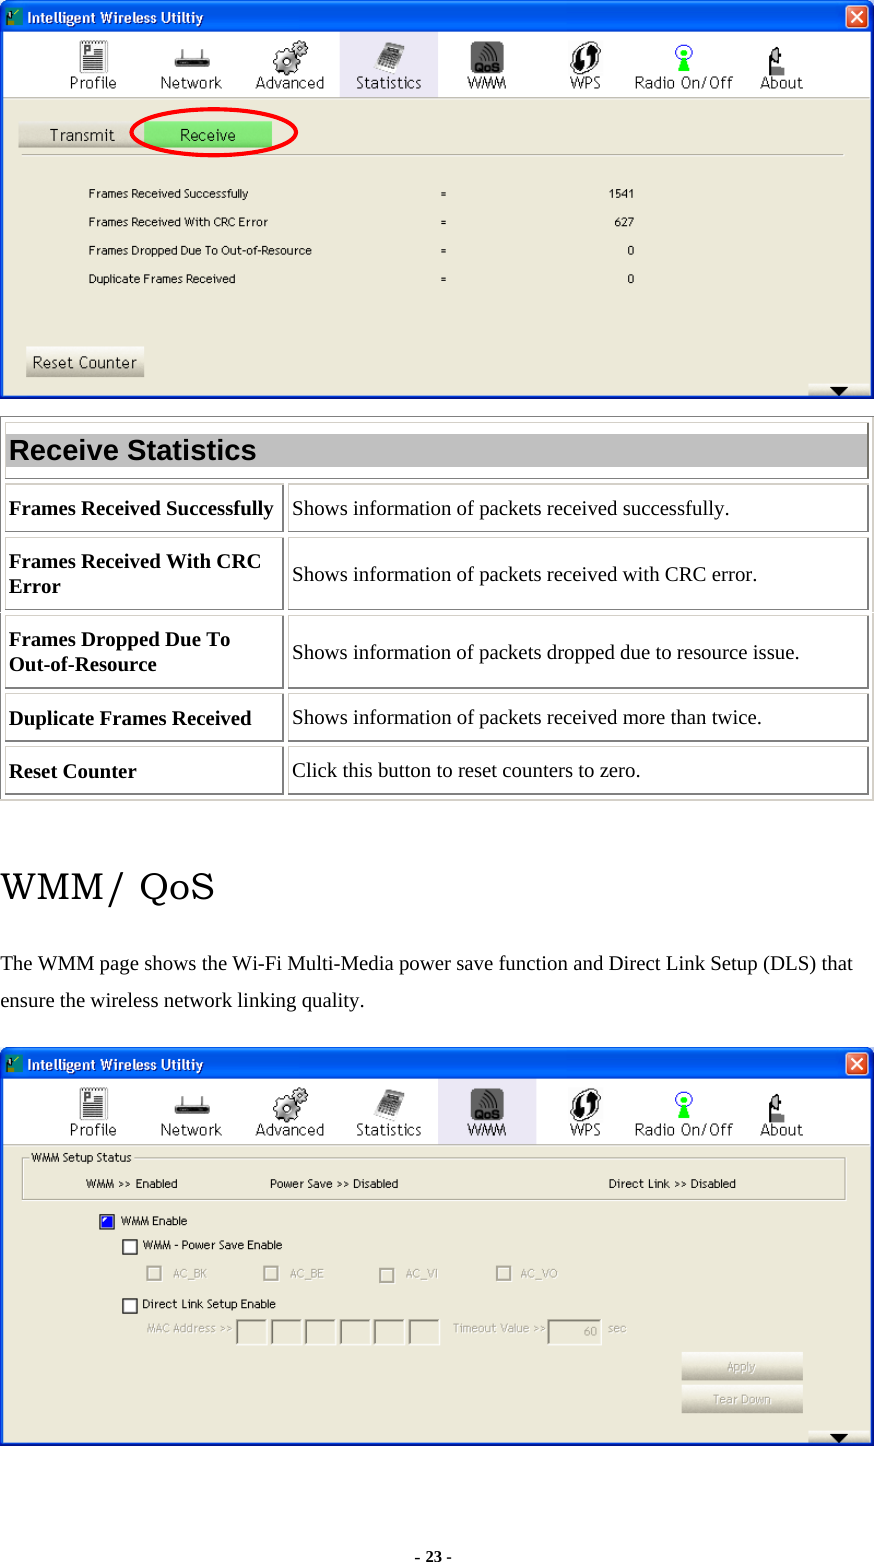  - 23 -  Receive Statistics Frames Received Successfully  Shows information of packets received successfully. Frames Received With CRC Error  Shows information of packets received with CRC error. Frames Dropped Due To Out-of-Resource  Shows information of packets dropped due to resource issue. Duplicate Frames Received  Shows information of packets received more than twice. Reset Counter  Click this button to reset counters to zero.  WMM/ QoS The WMM page shows the Wi-Fi Multi-Media power save function and Direct Link Setup (DLS) that ensure the wireless network linking quality.  